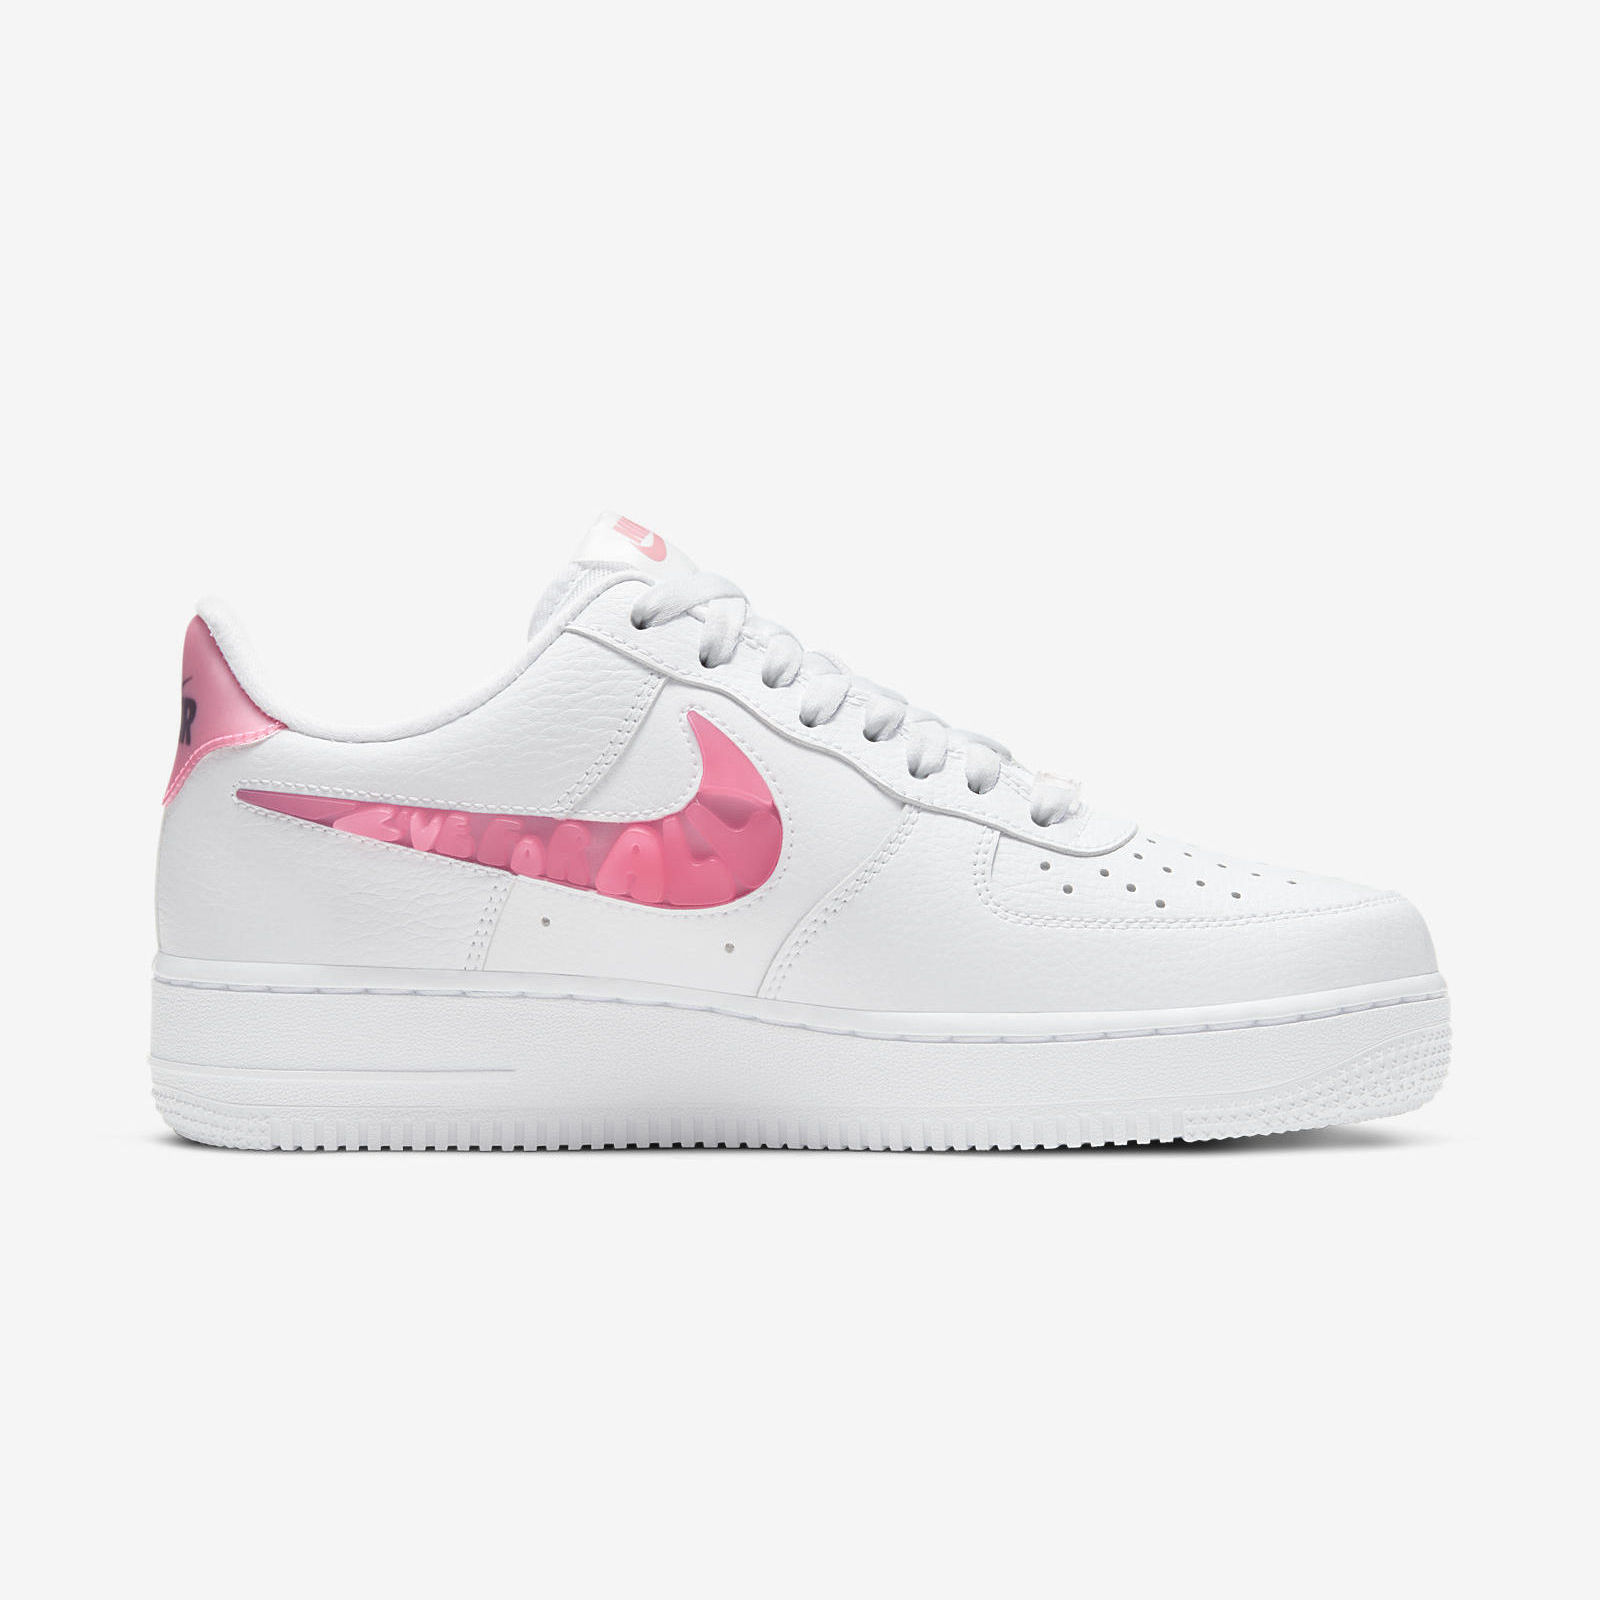 Nike Air Force 1 SE
« Love For All »